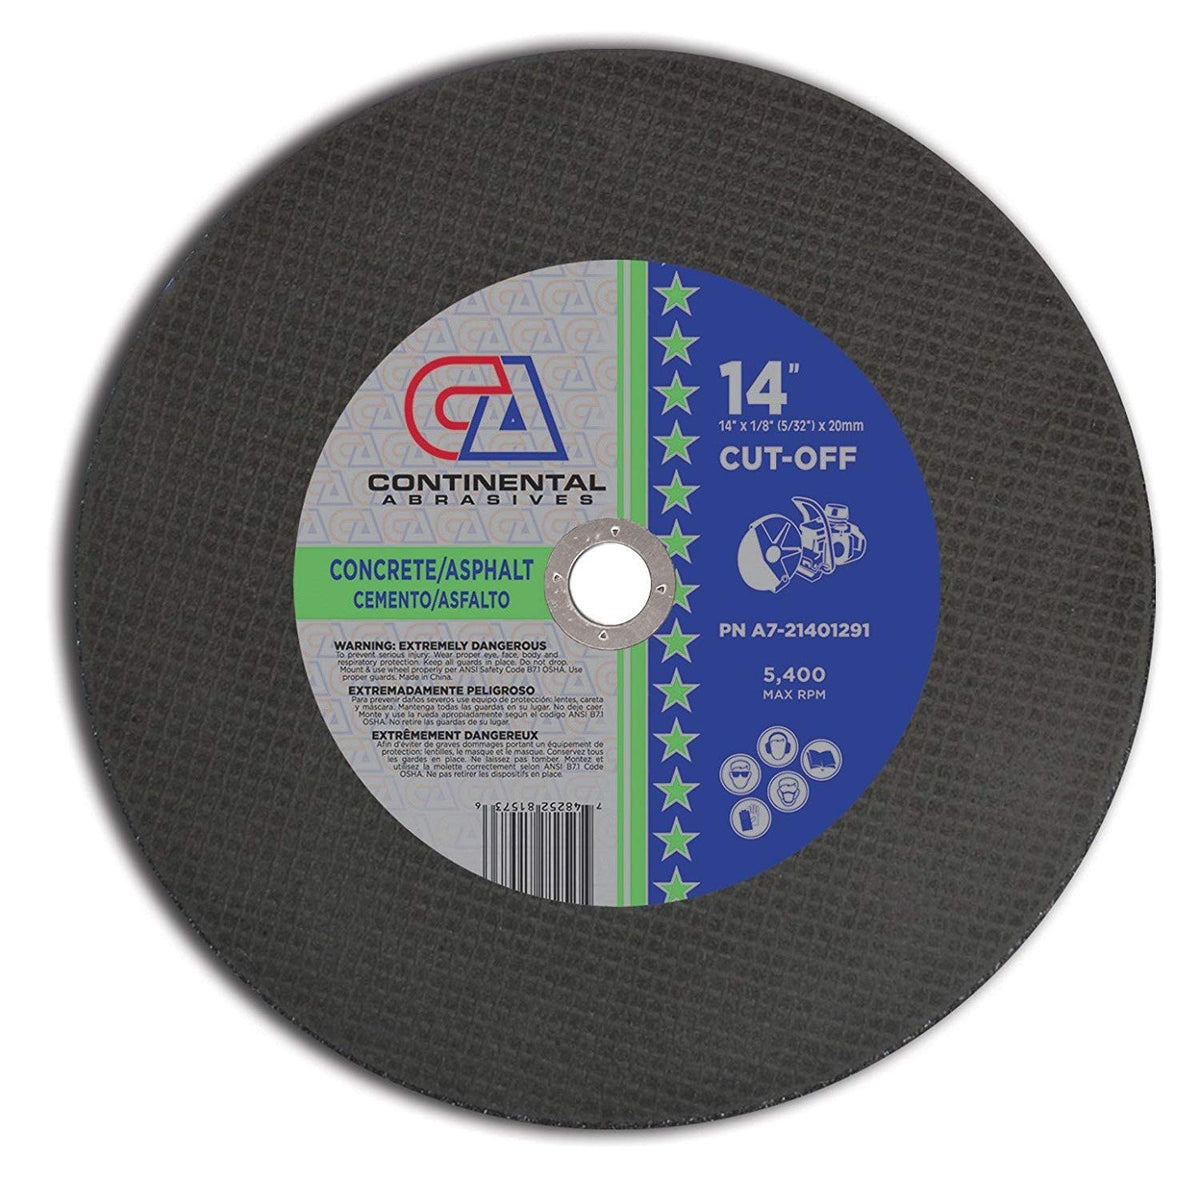 14" x 1/8" (5/32") x 20mm Type 1 Gas Saw Wheels for Concrete/Asphalt (Pack of 10)